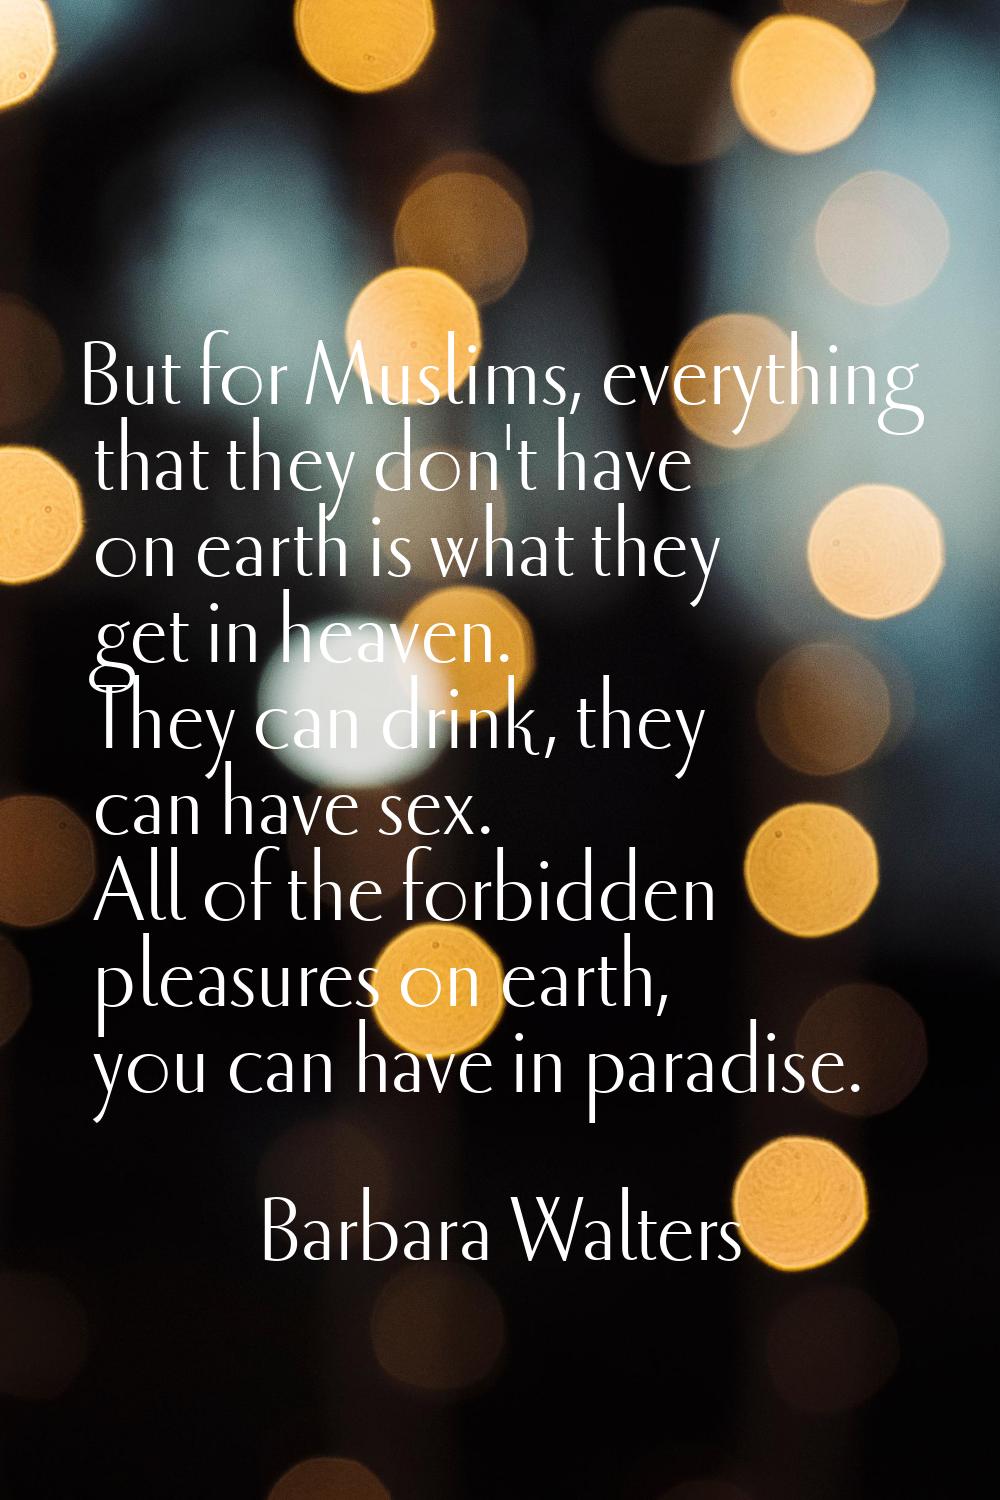 But for Muslims, everything that they don't have on earth is what they get in heaven. They can drin